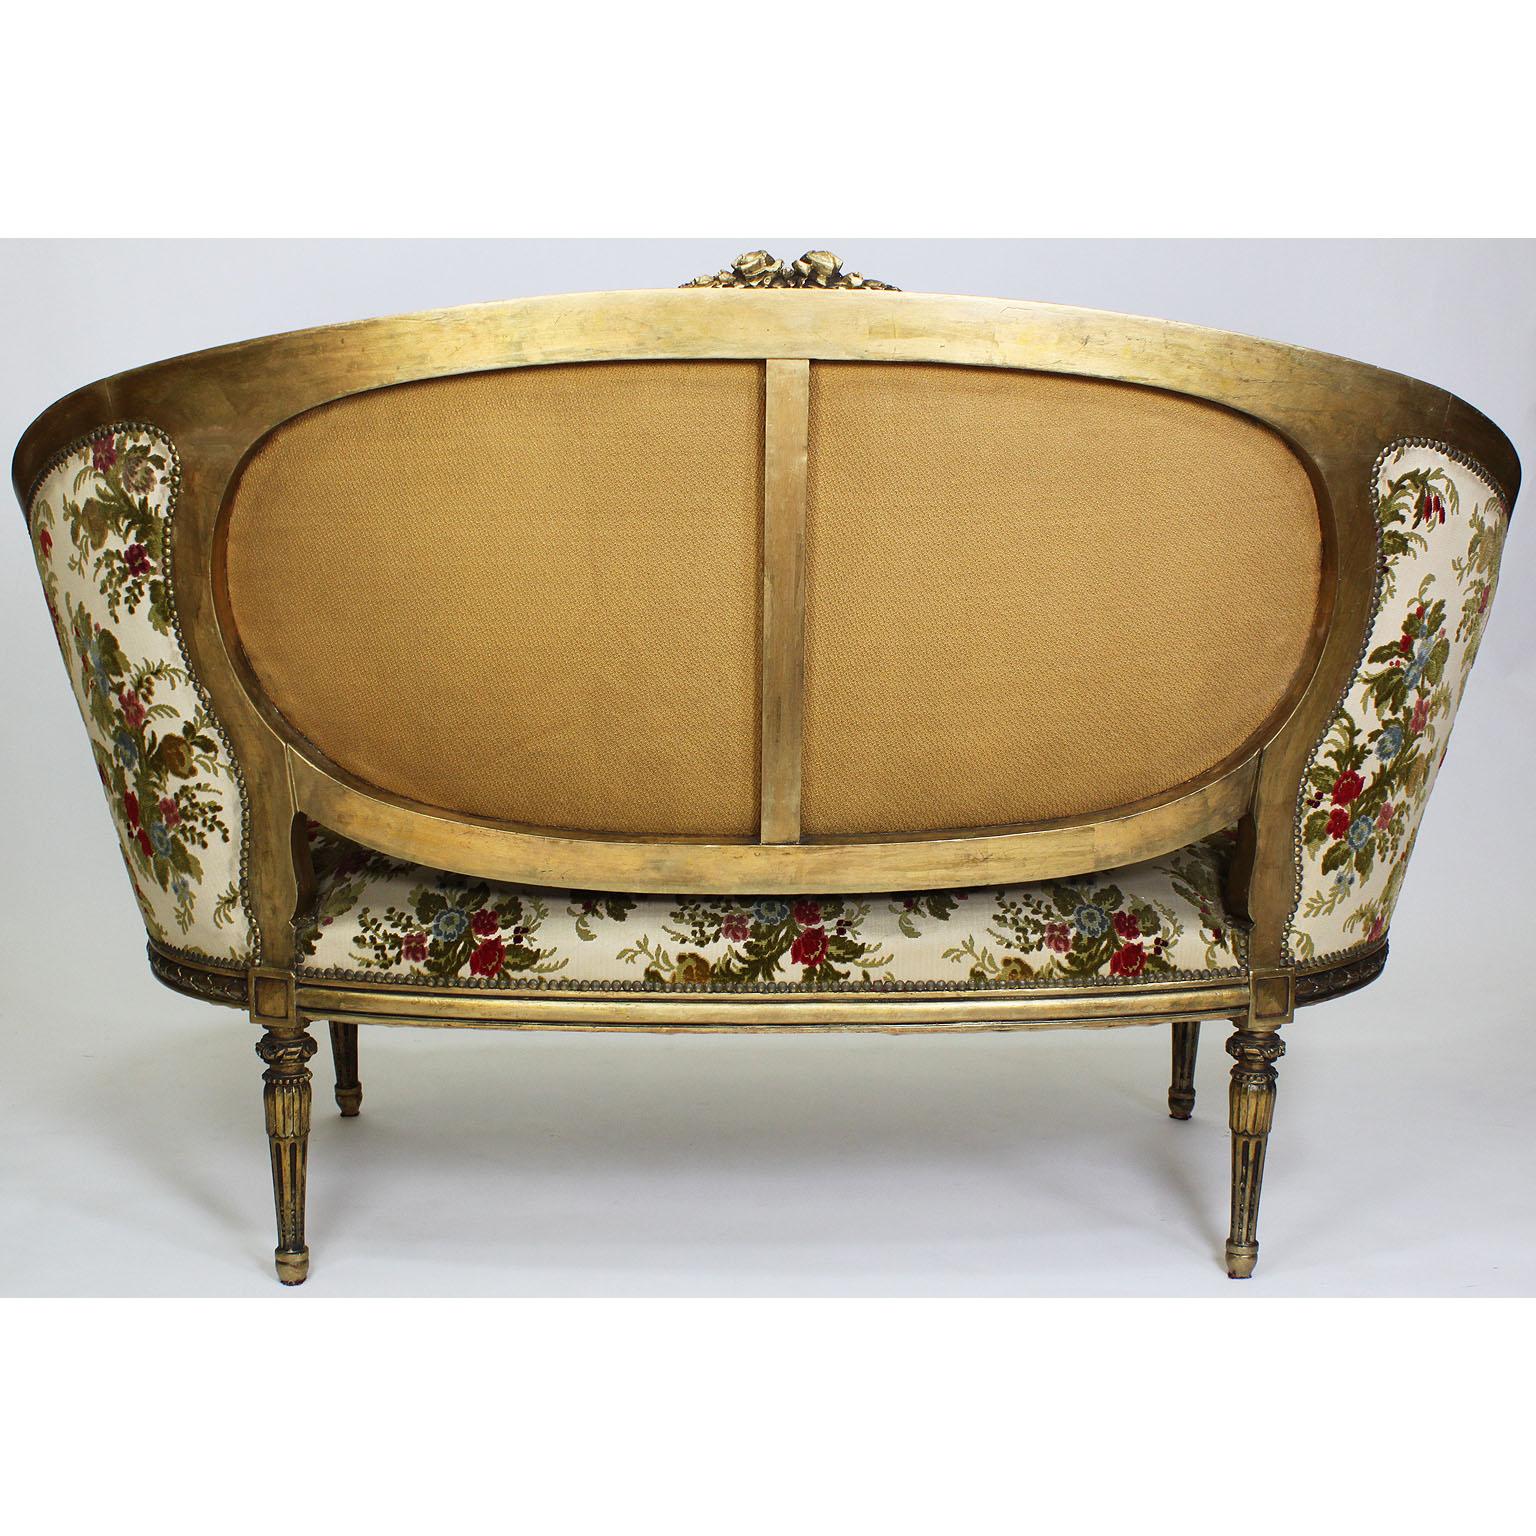 French 19th-20th Century Louis XVI Style Giltwood Carved 3-Piece Salon Suite For Sale 9